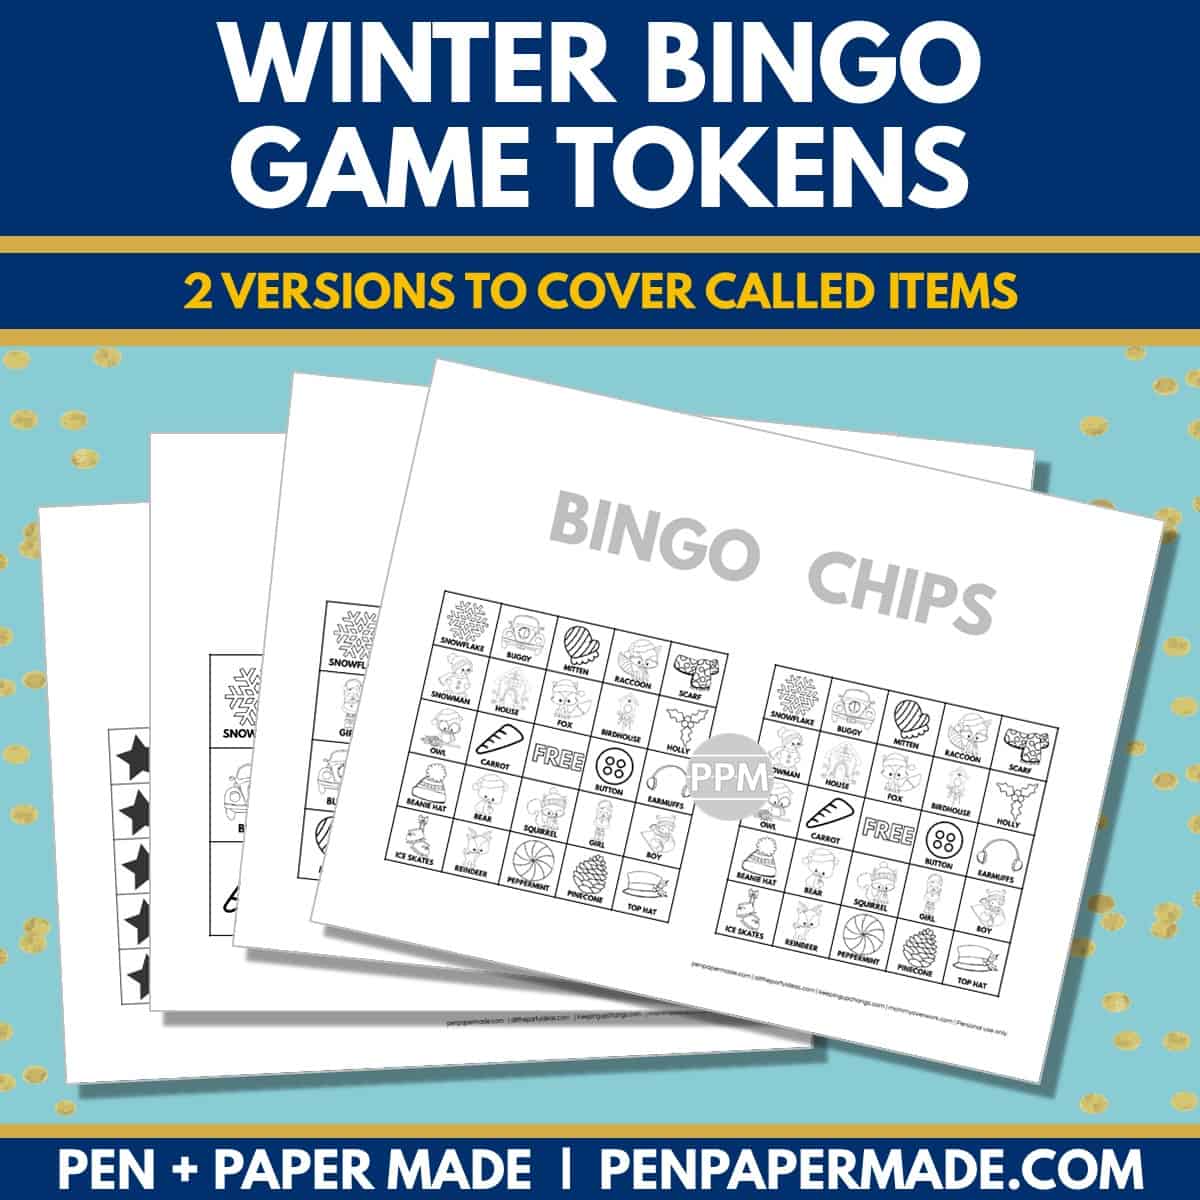 winter bingo card 5x5, 4x4, 3x3 game chips, tokens, markers.